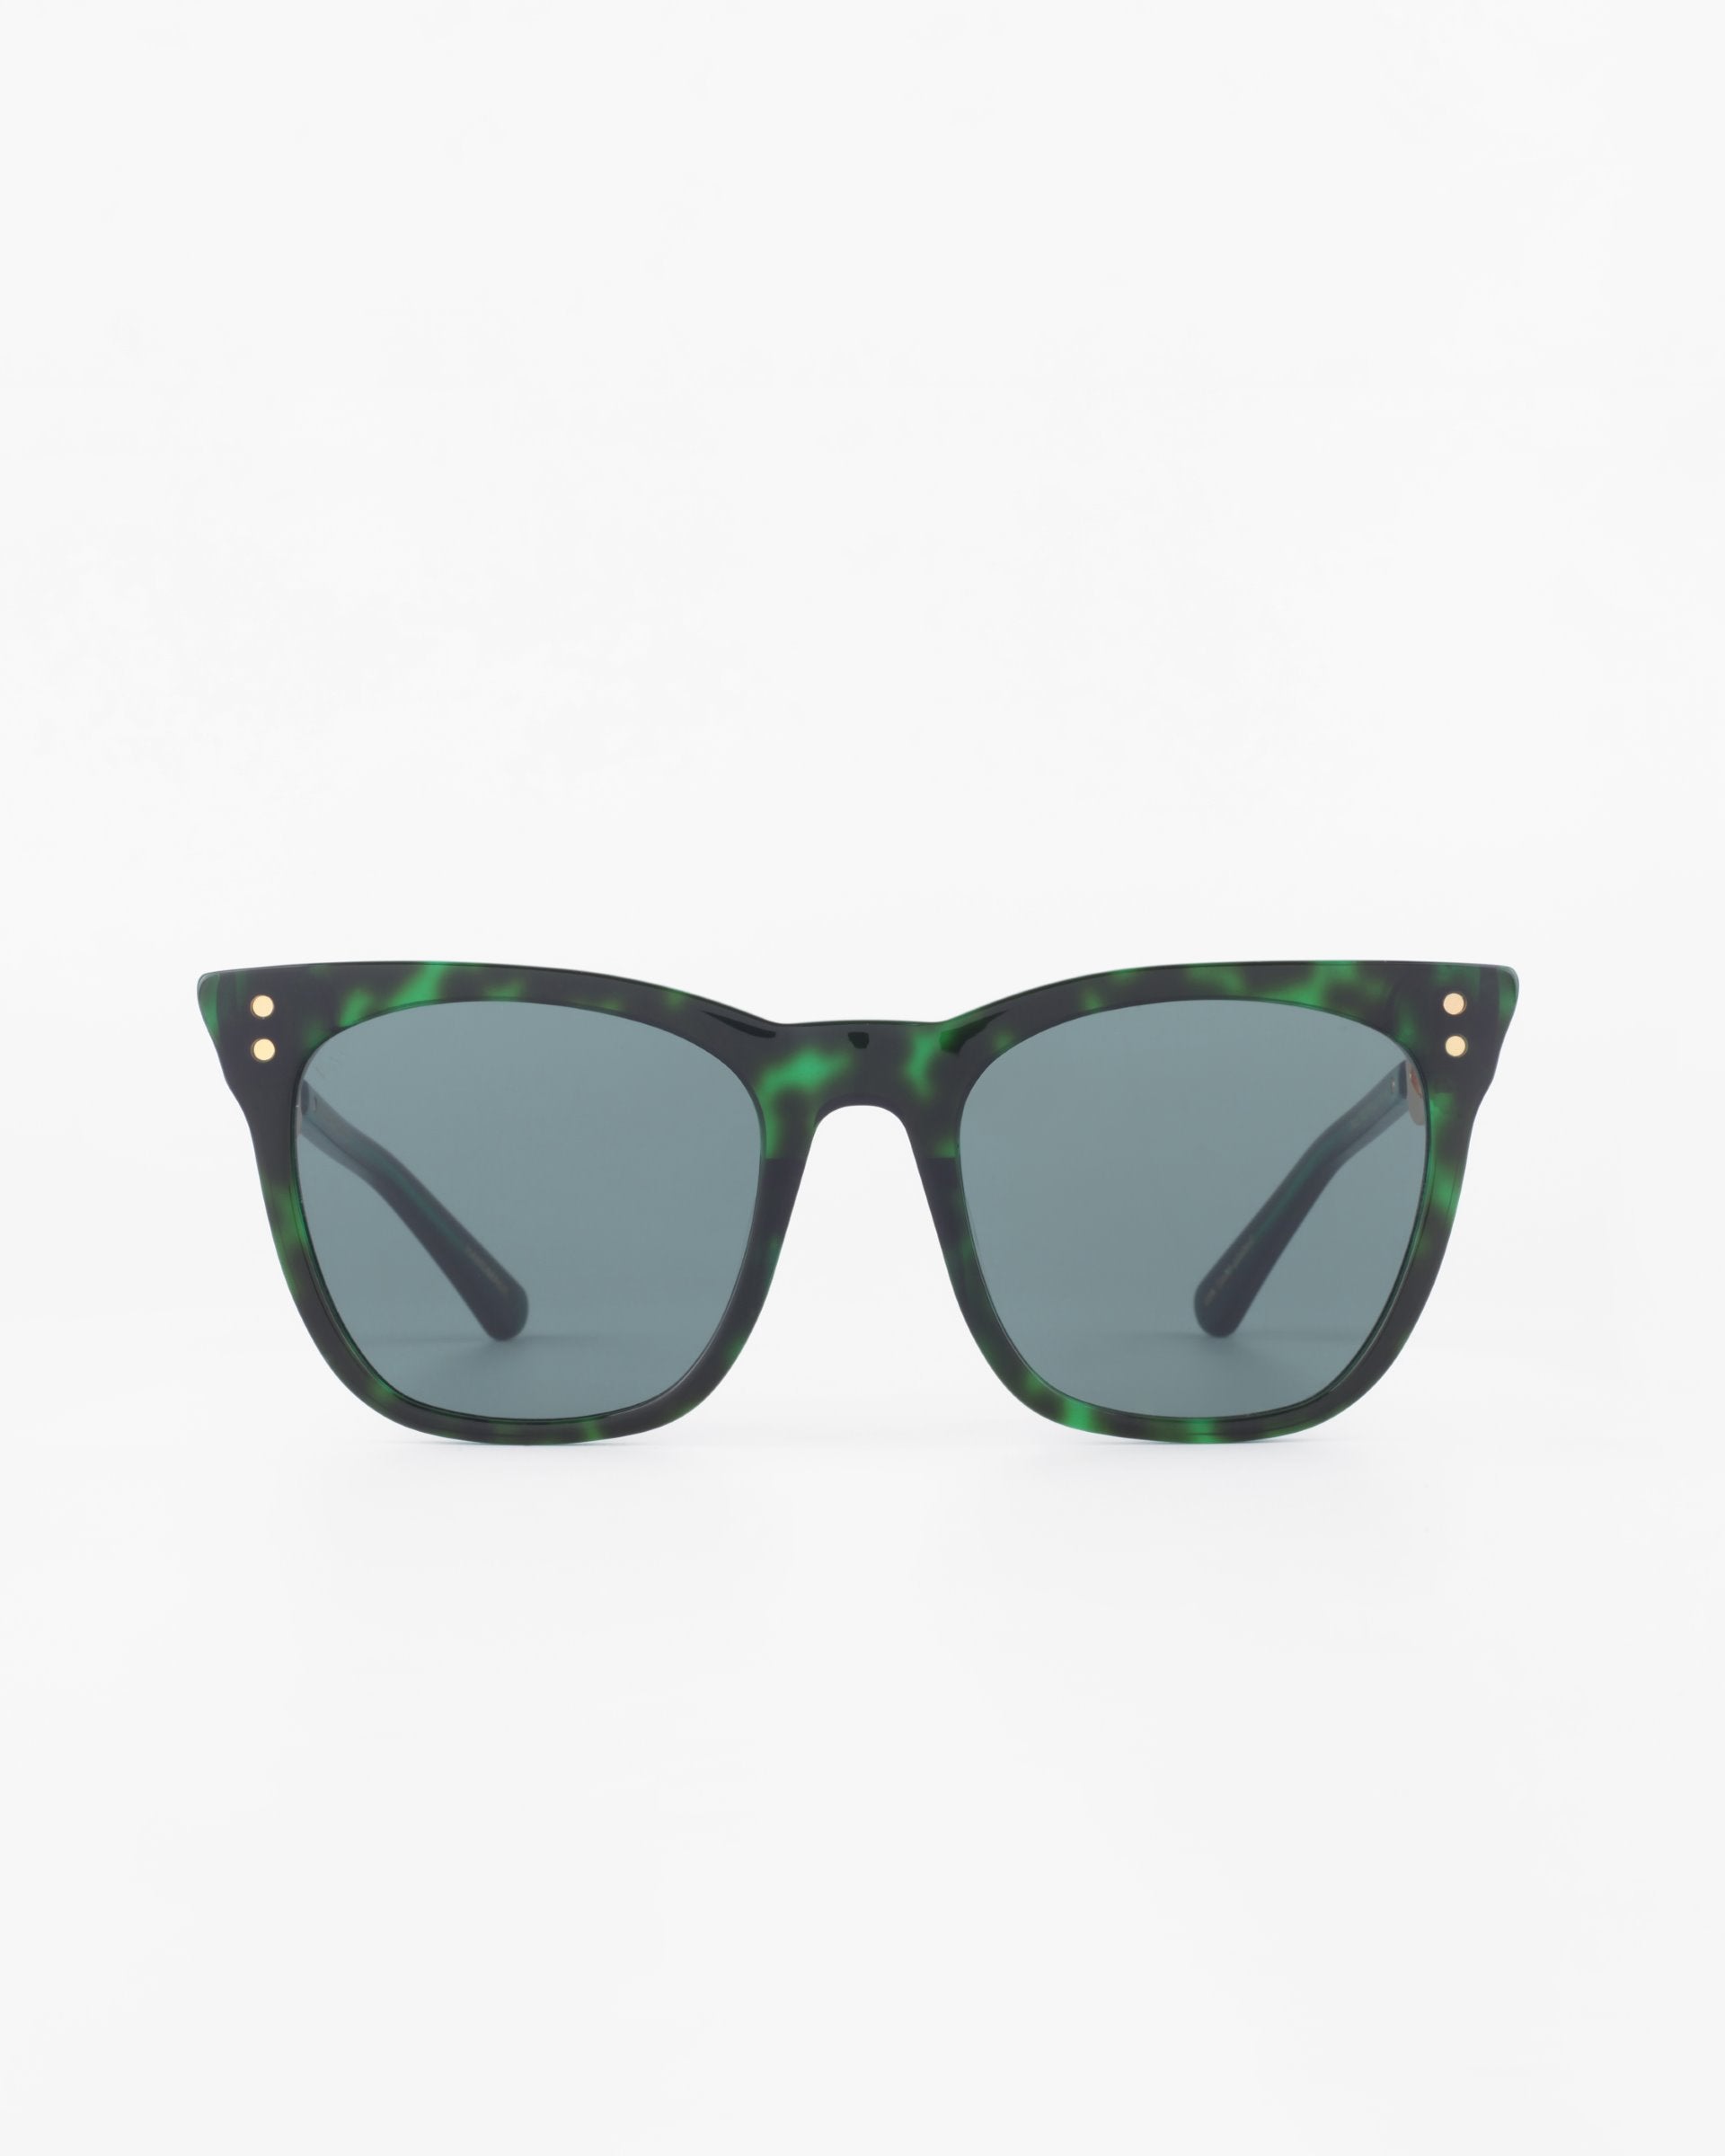 A pair of green tortoiseshell-patterned Deco sunglasses by For Art's Sake® with a square frame and dark lenses is centered against a plain white background. The acetate temples have small gold accents near the hinges.